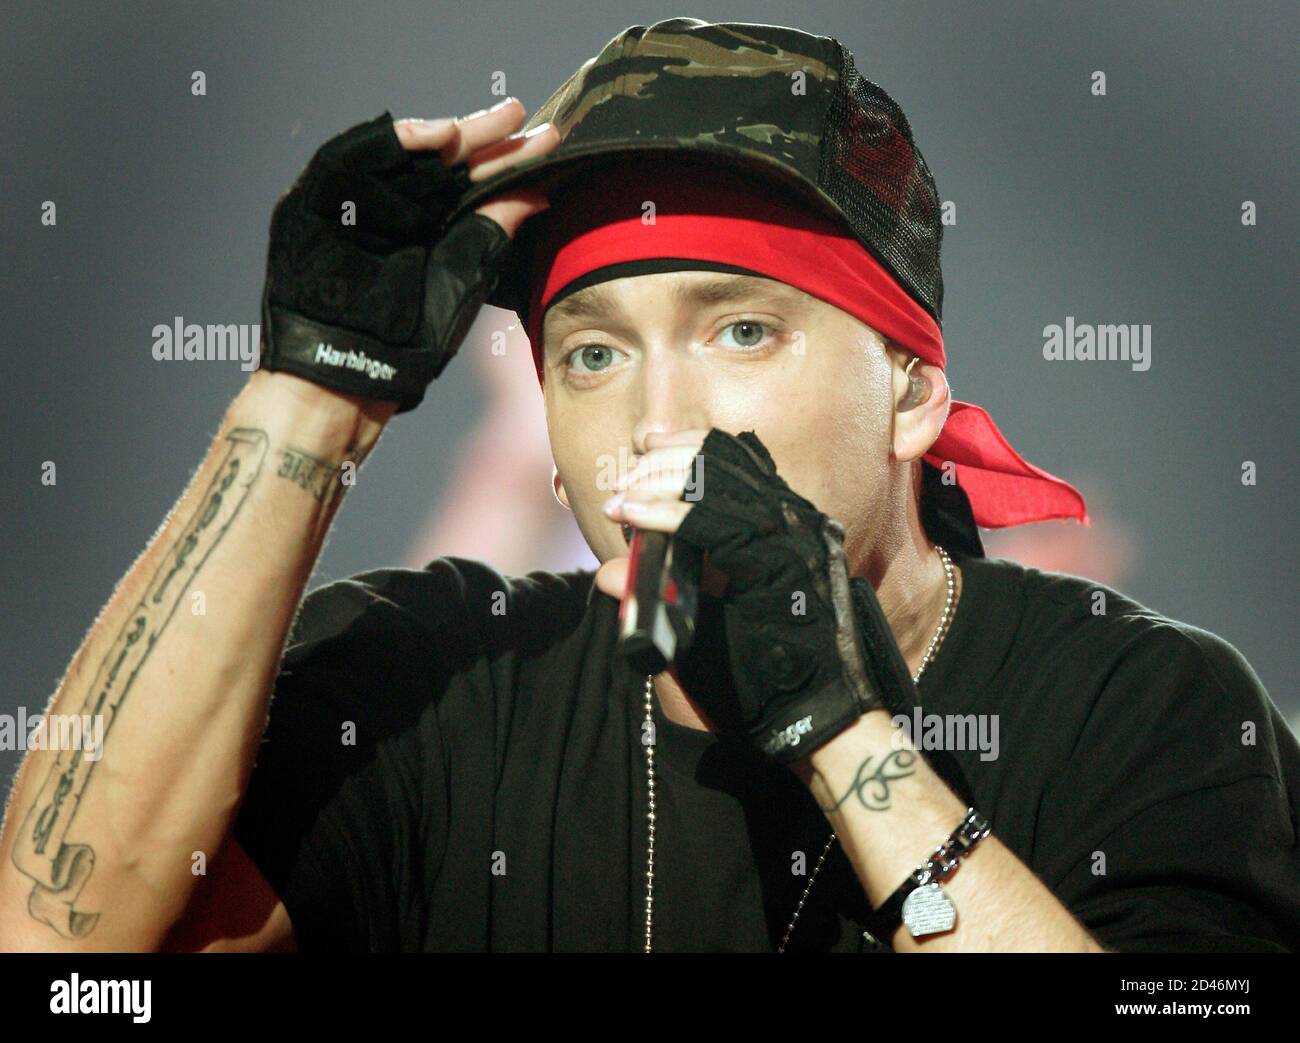 U.S. singer Eminem performs during the MTV Europe Music Awards 2004  ceremony at the Tor Di Valle in Rome, November 18, 2004. REUTERS/Alessia  Pierdomenico DJM/DL Stock Photo - Alamy